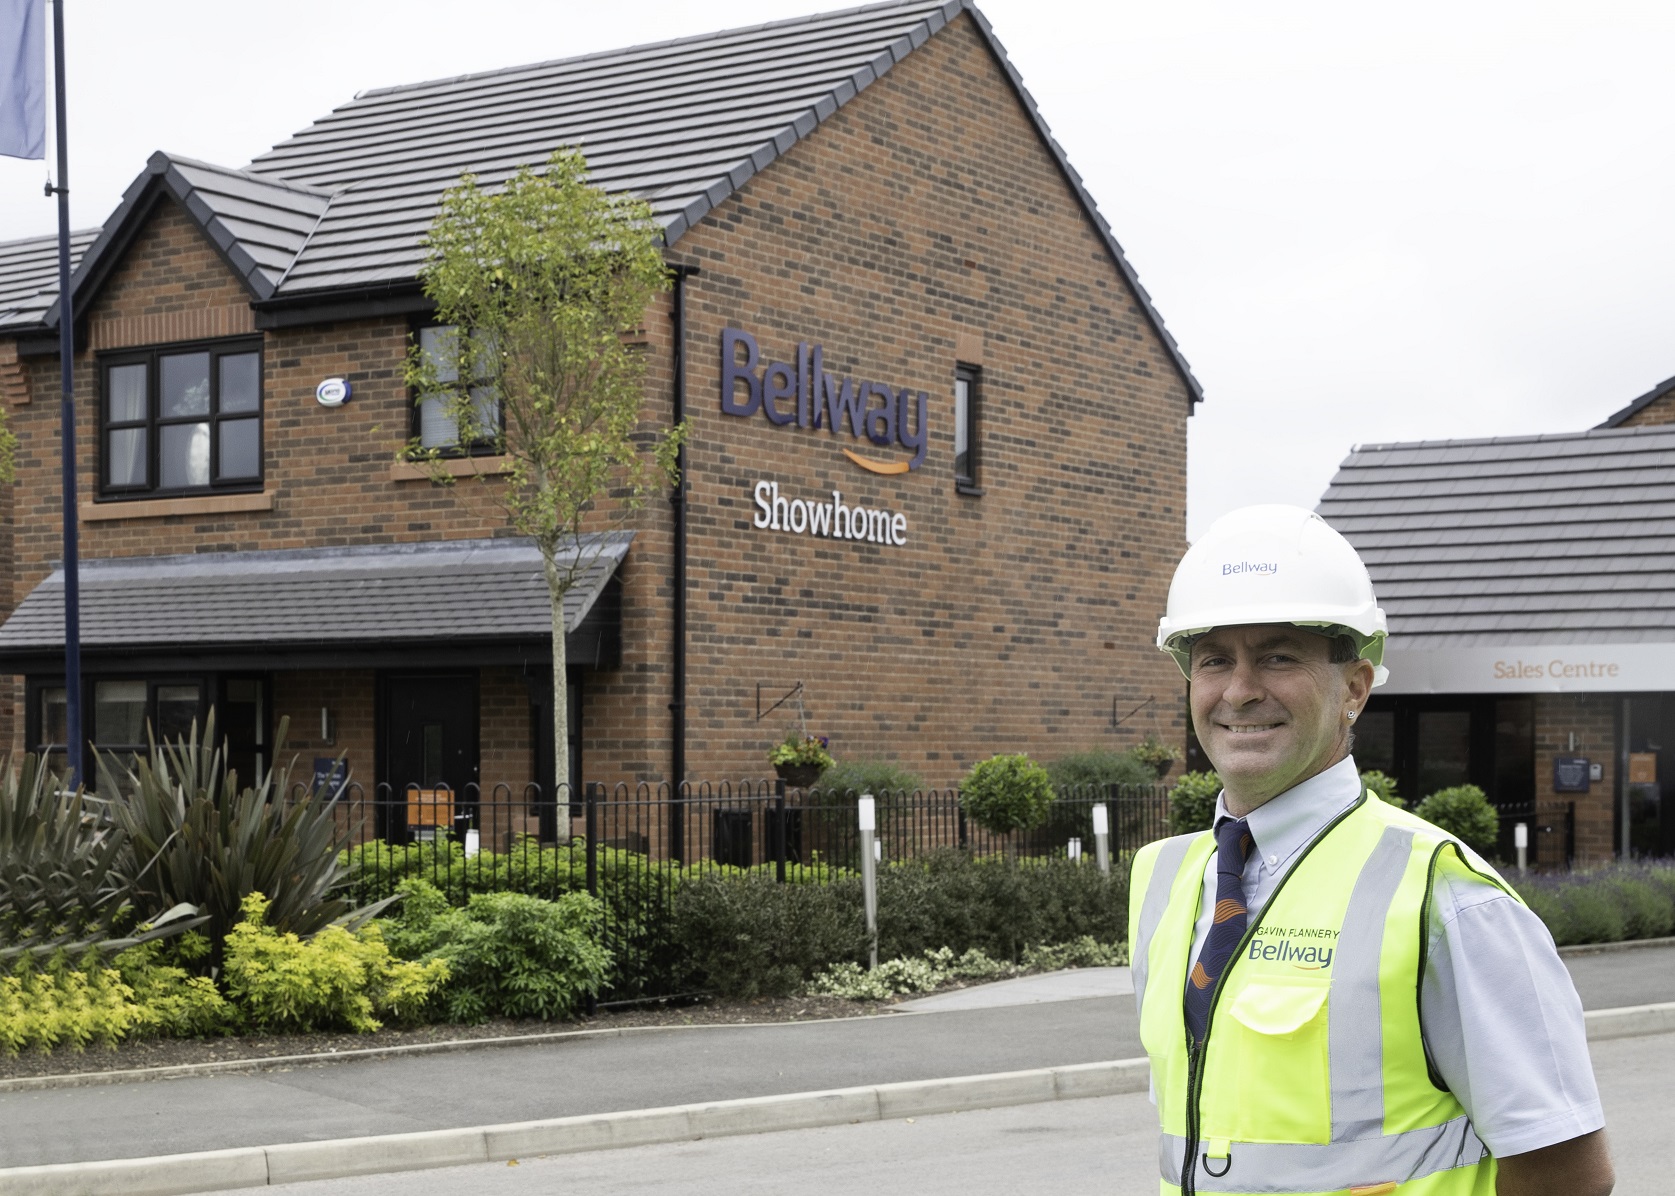 Bolton site manager awarded one of highest house building accolades